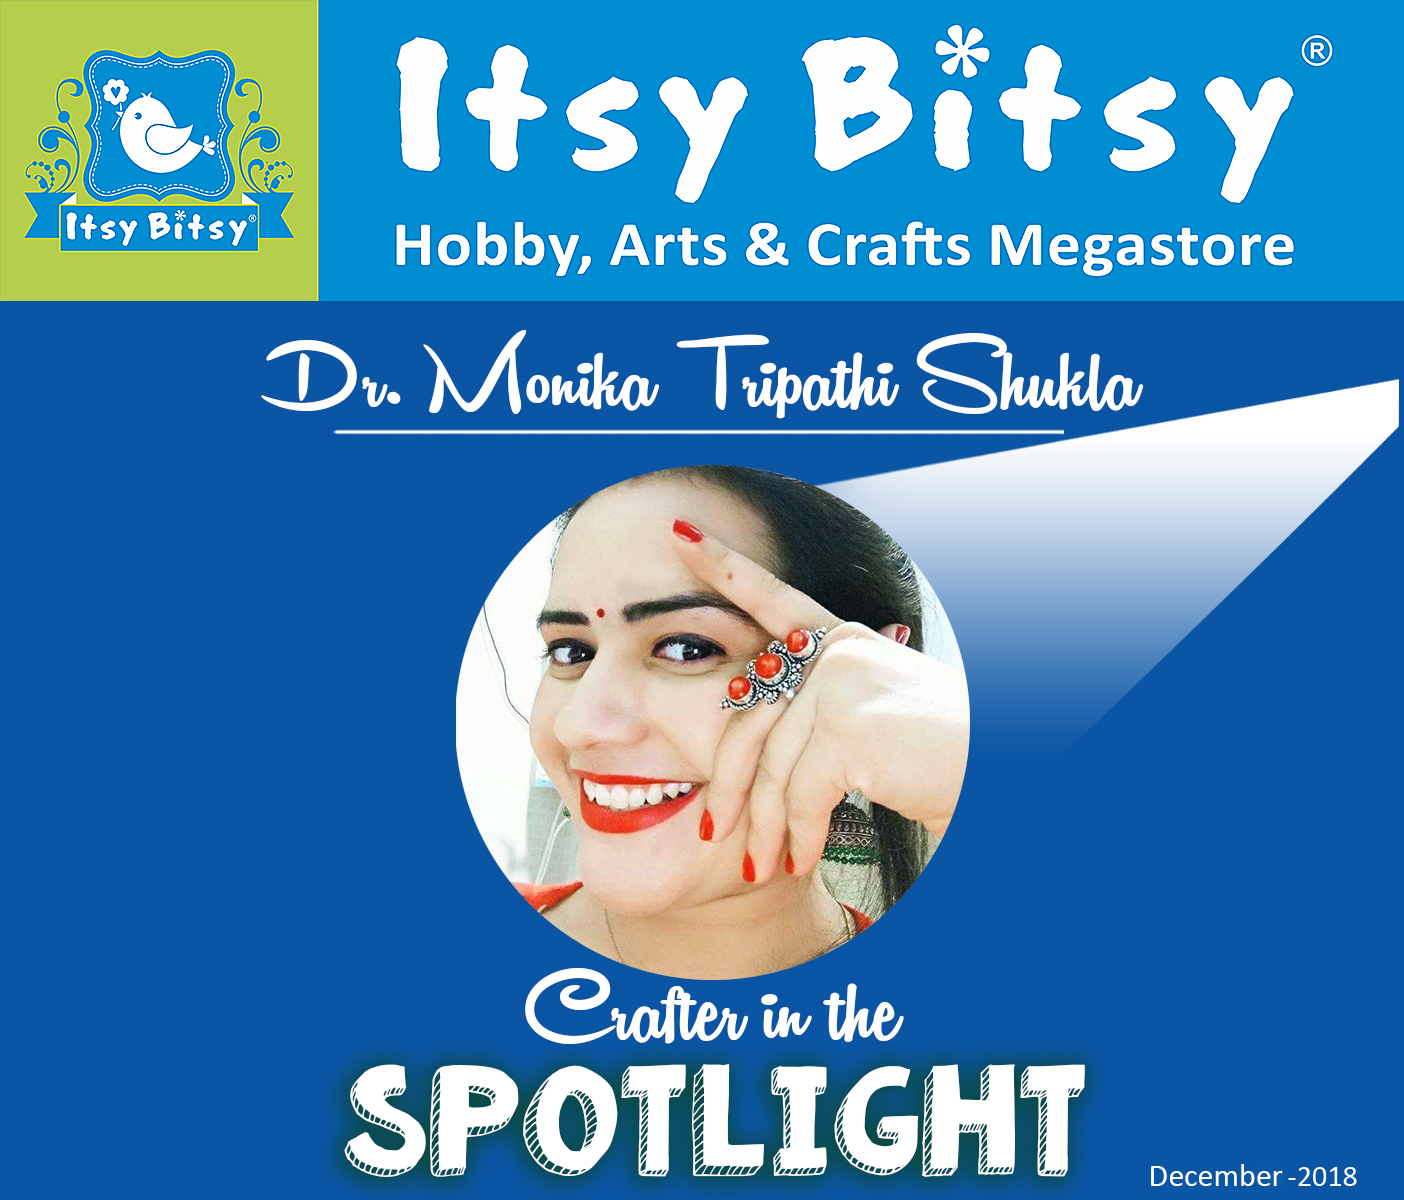 Honoured to be "Crafter in the Spotlight"